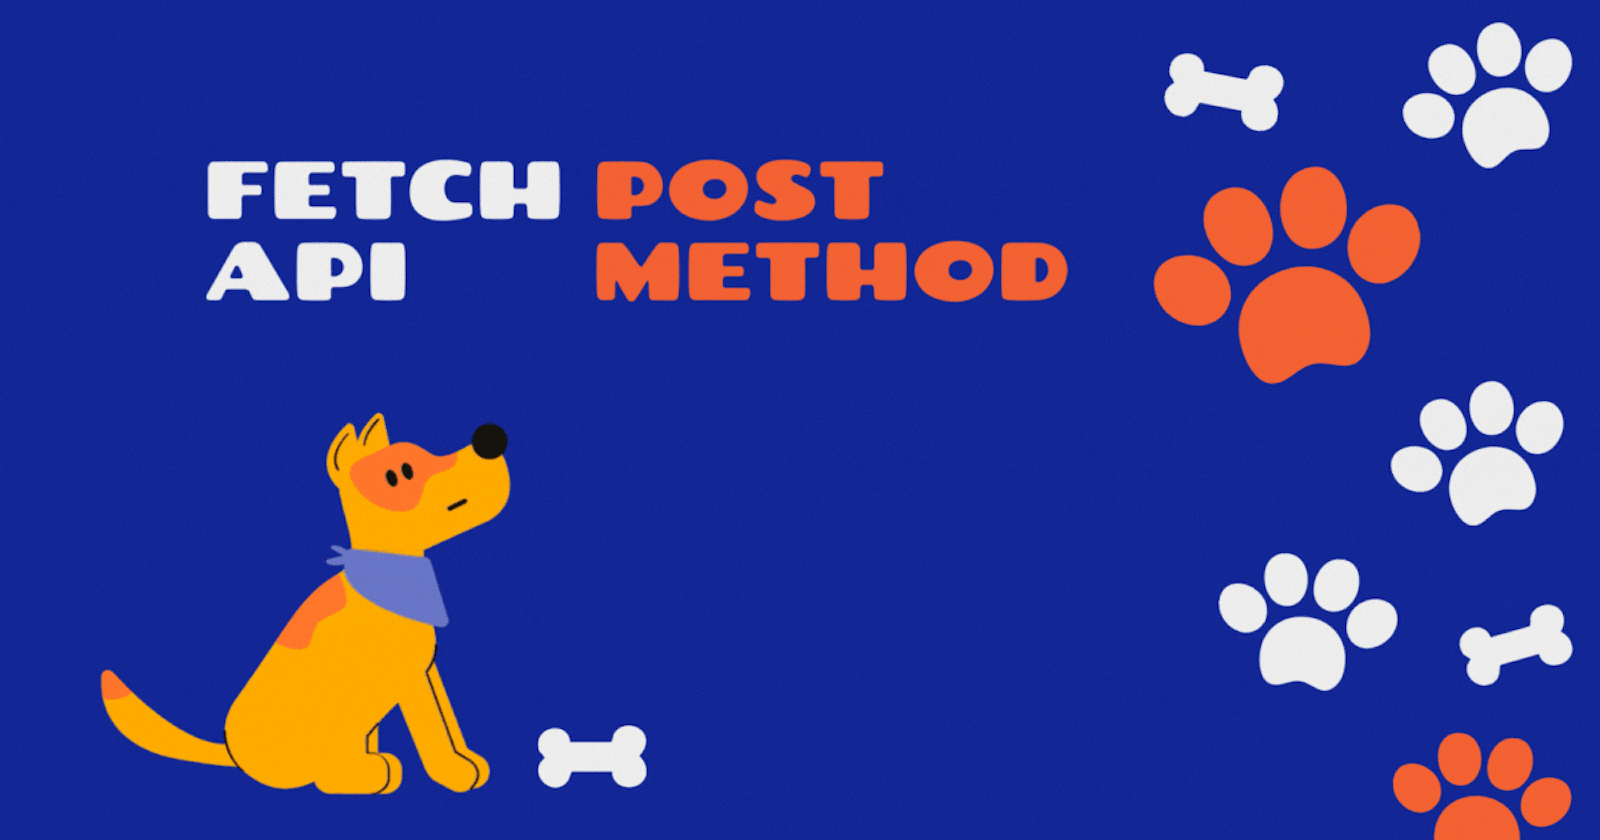 Using Fetch API POST Method to Store User Data on the Server